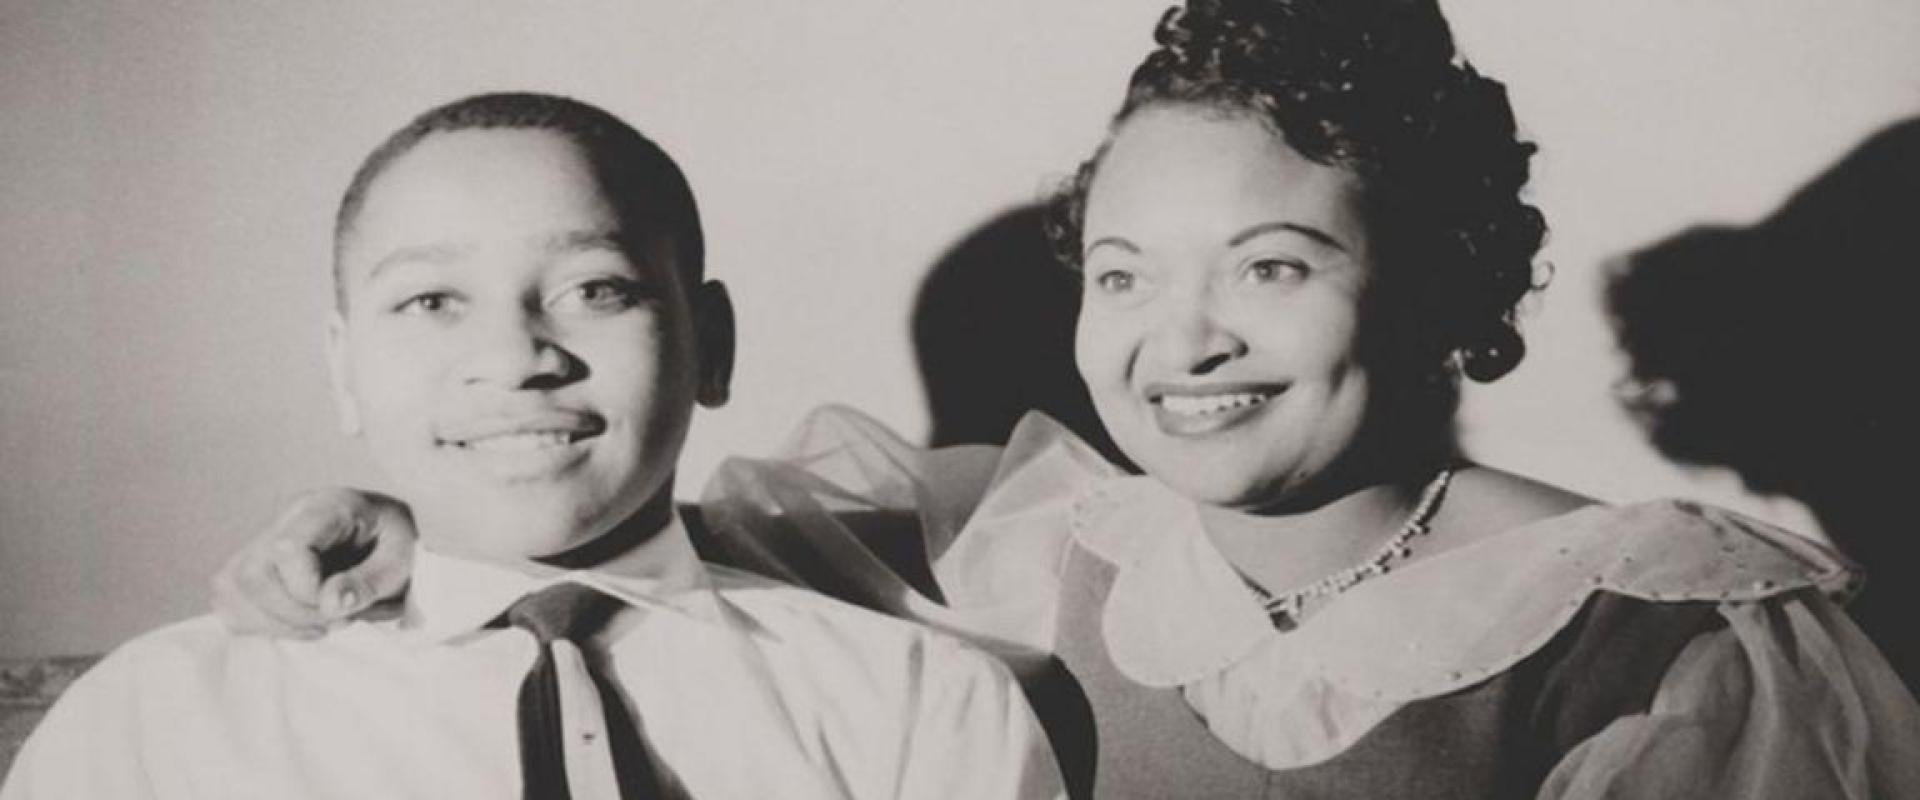 Collection of the Smithsonian National Museum of African American History and Culture, Gift of the Mamie Till Mobley family.